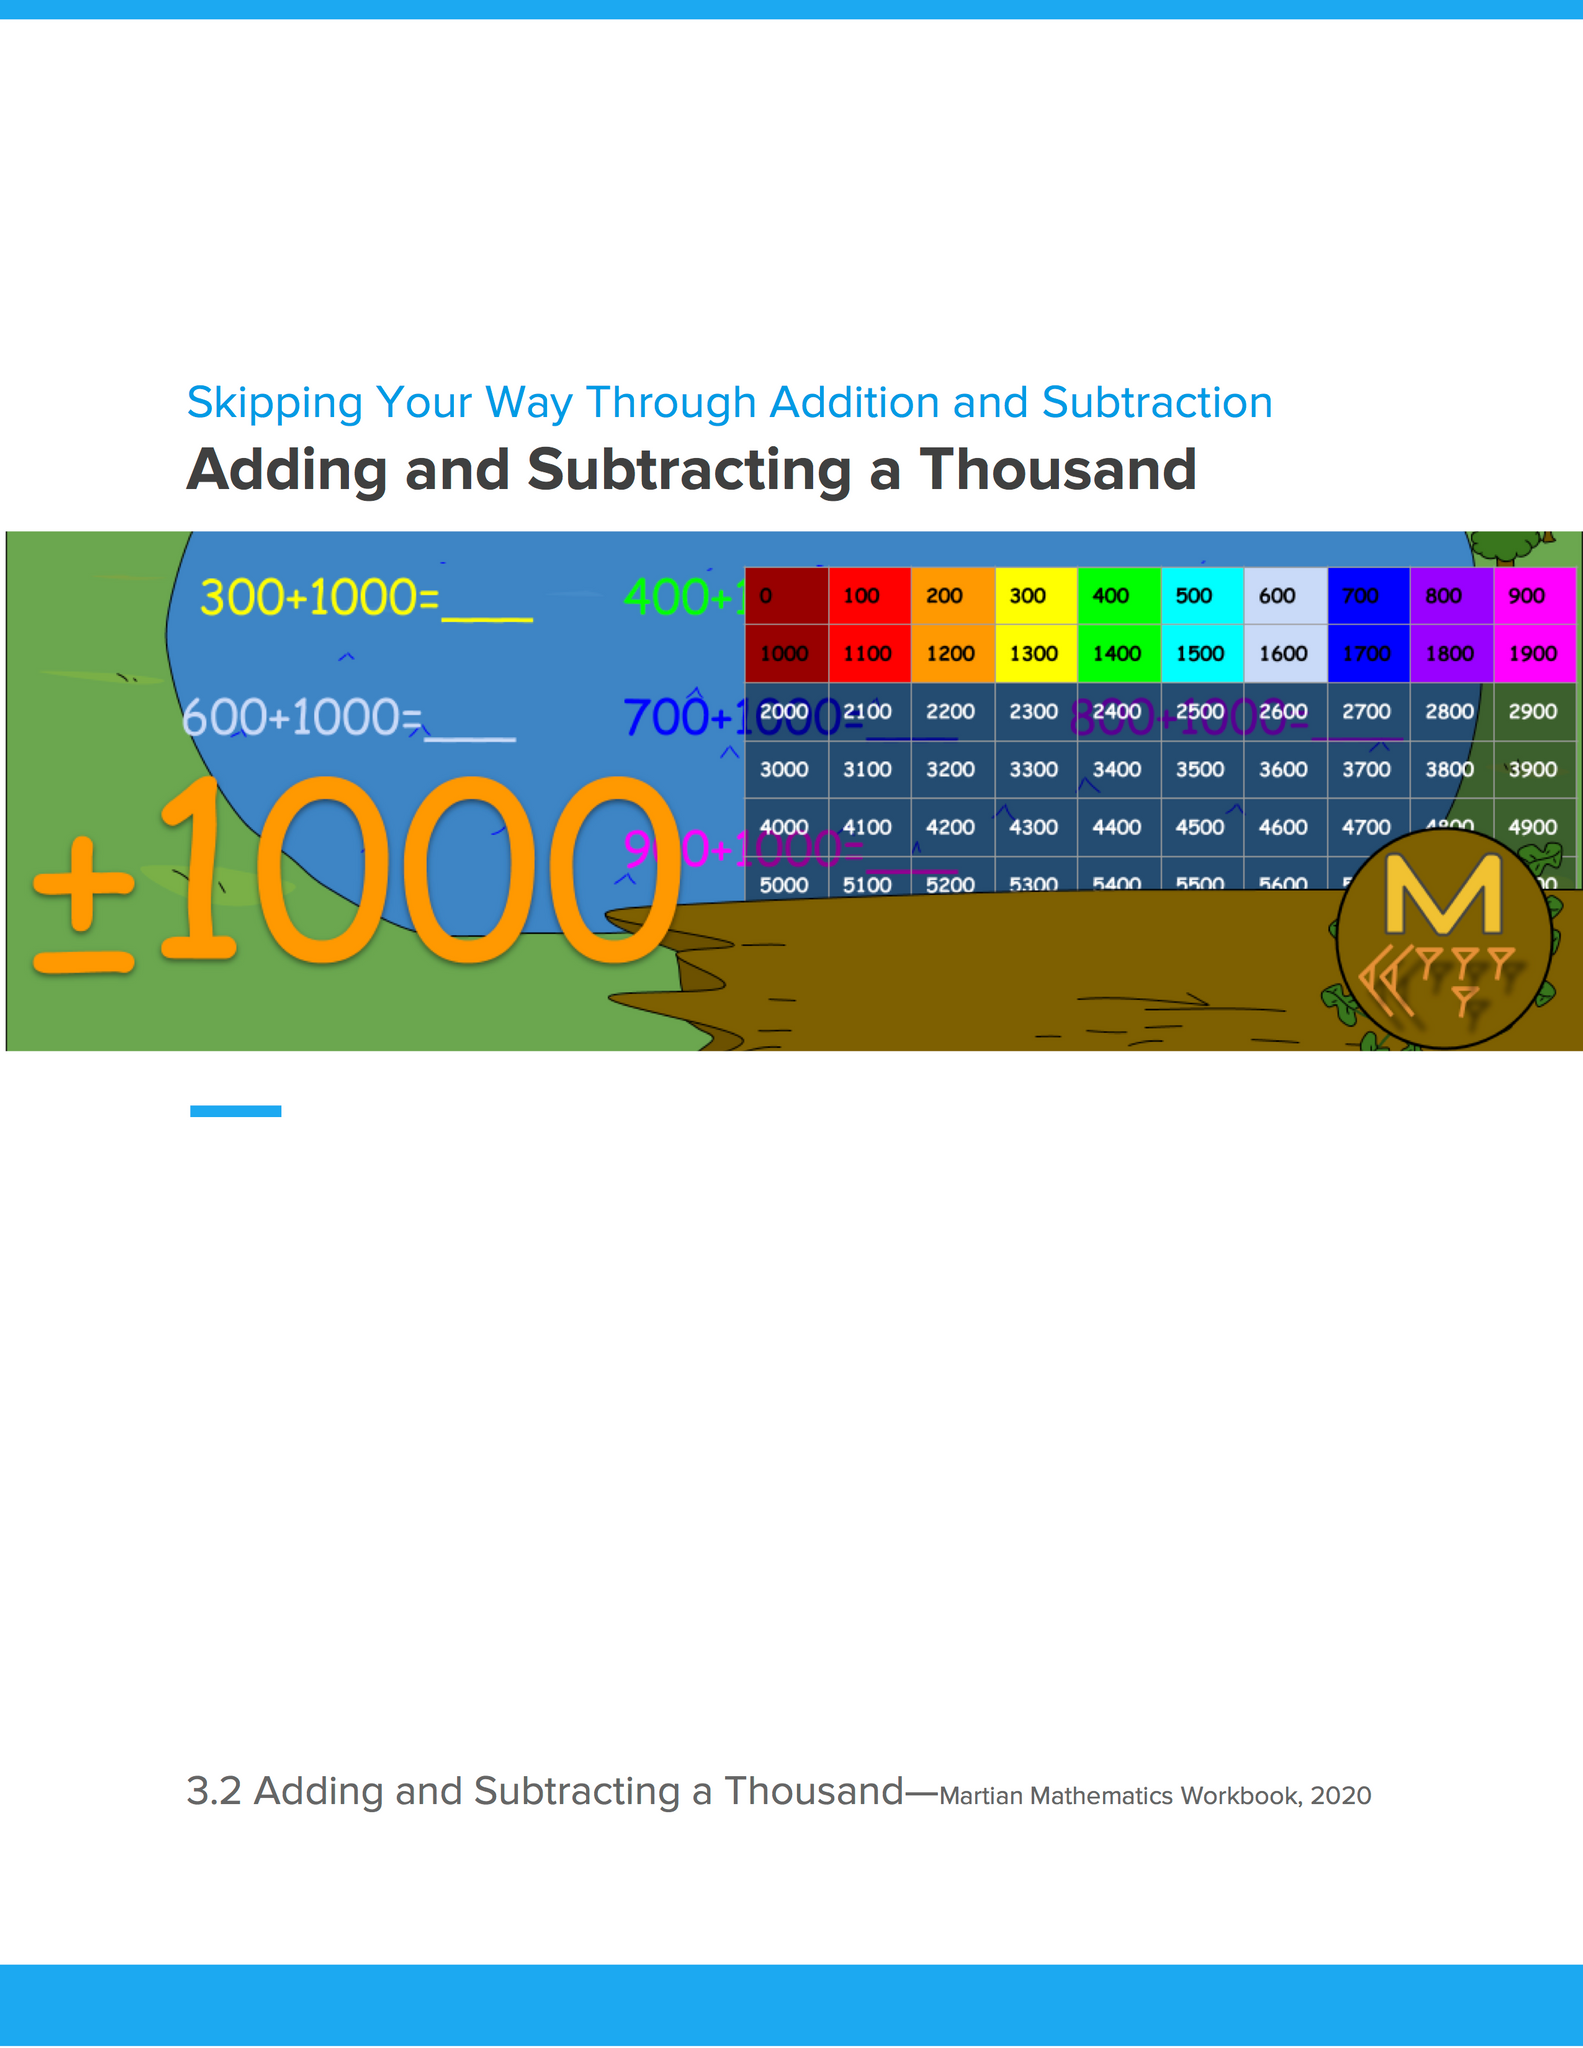 Adding and Subtracting a Thousand